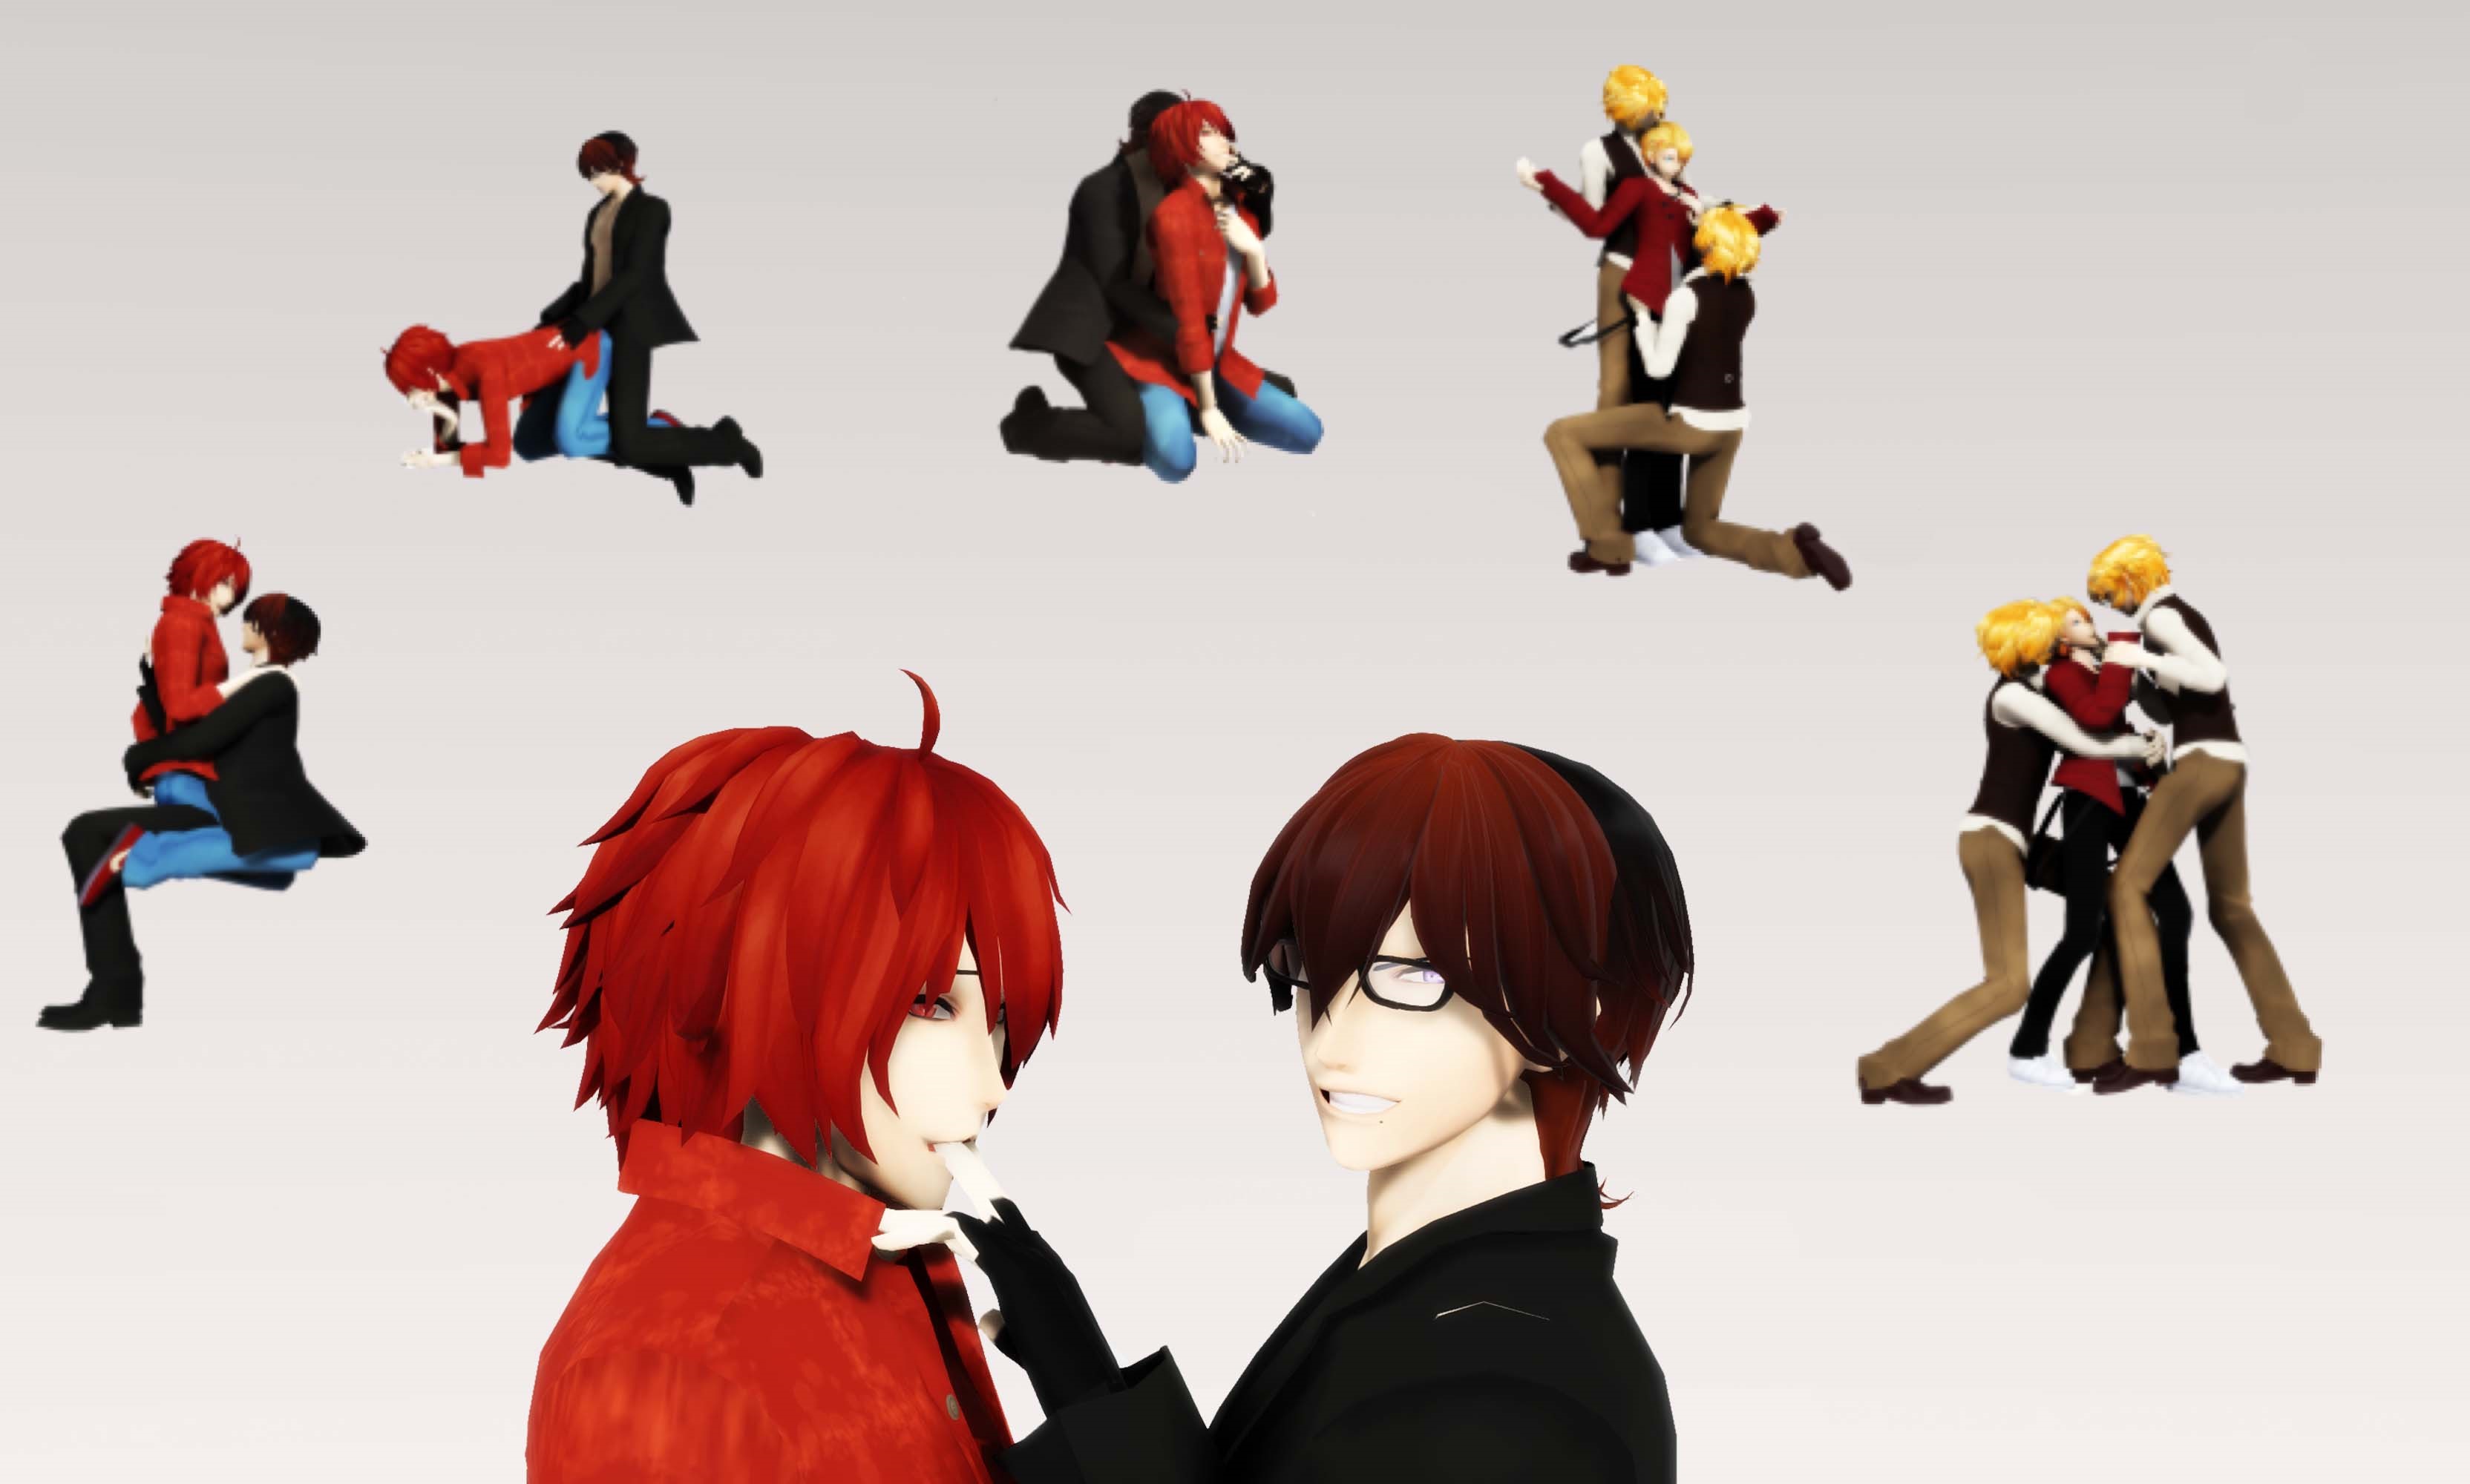 MMD Pose DL] Yaoi Pose Pack II Download by AimeeSa on DeviantArt